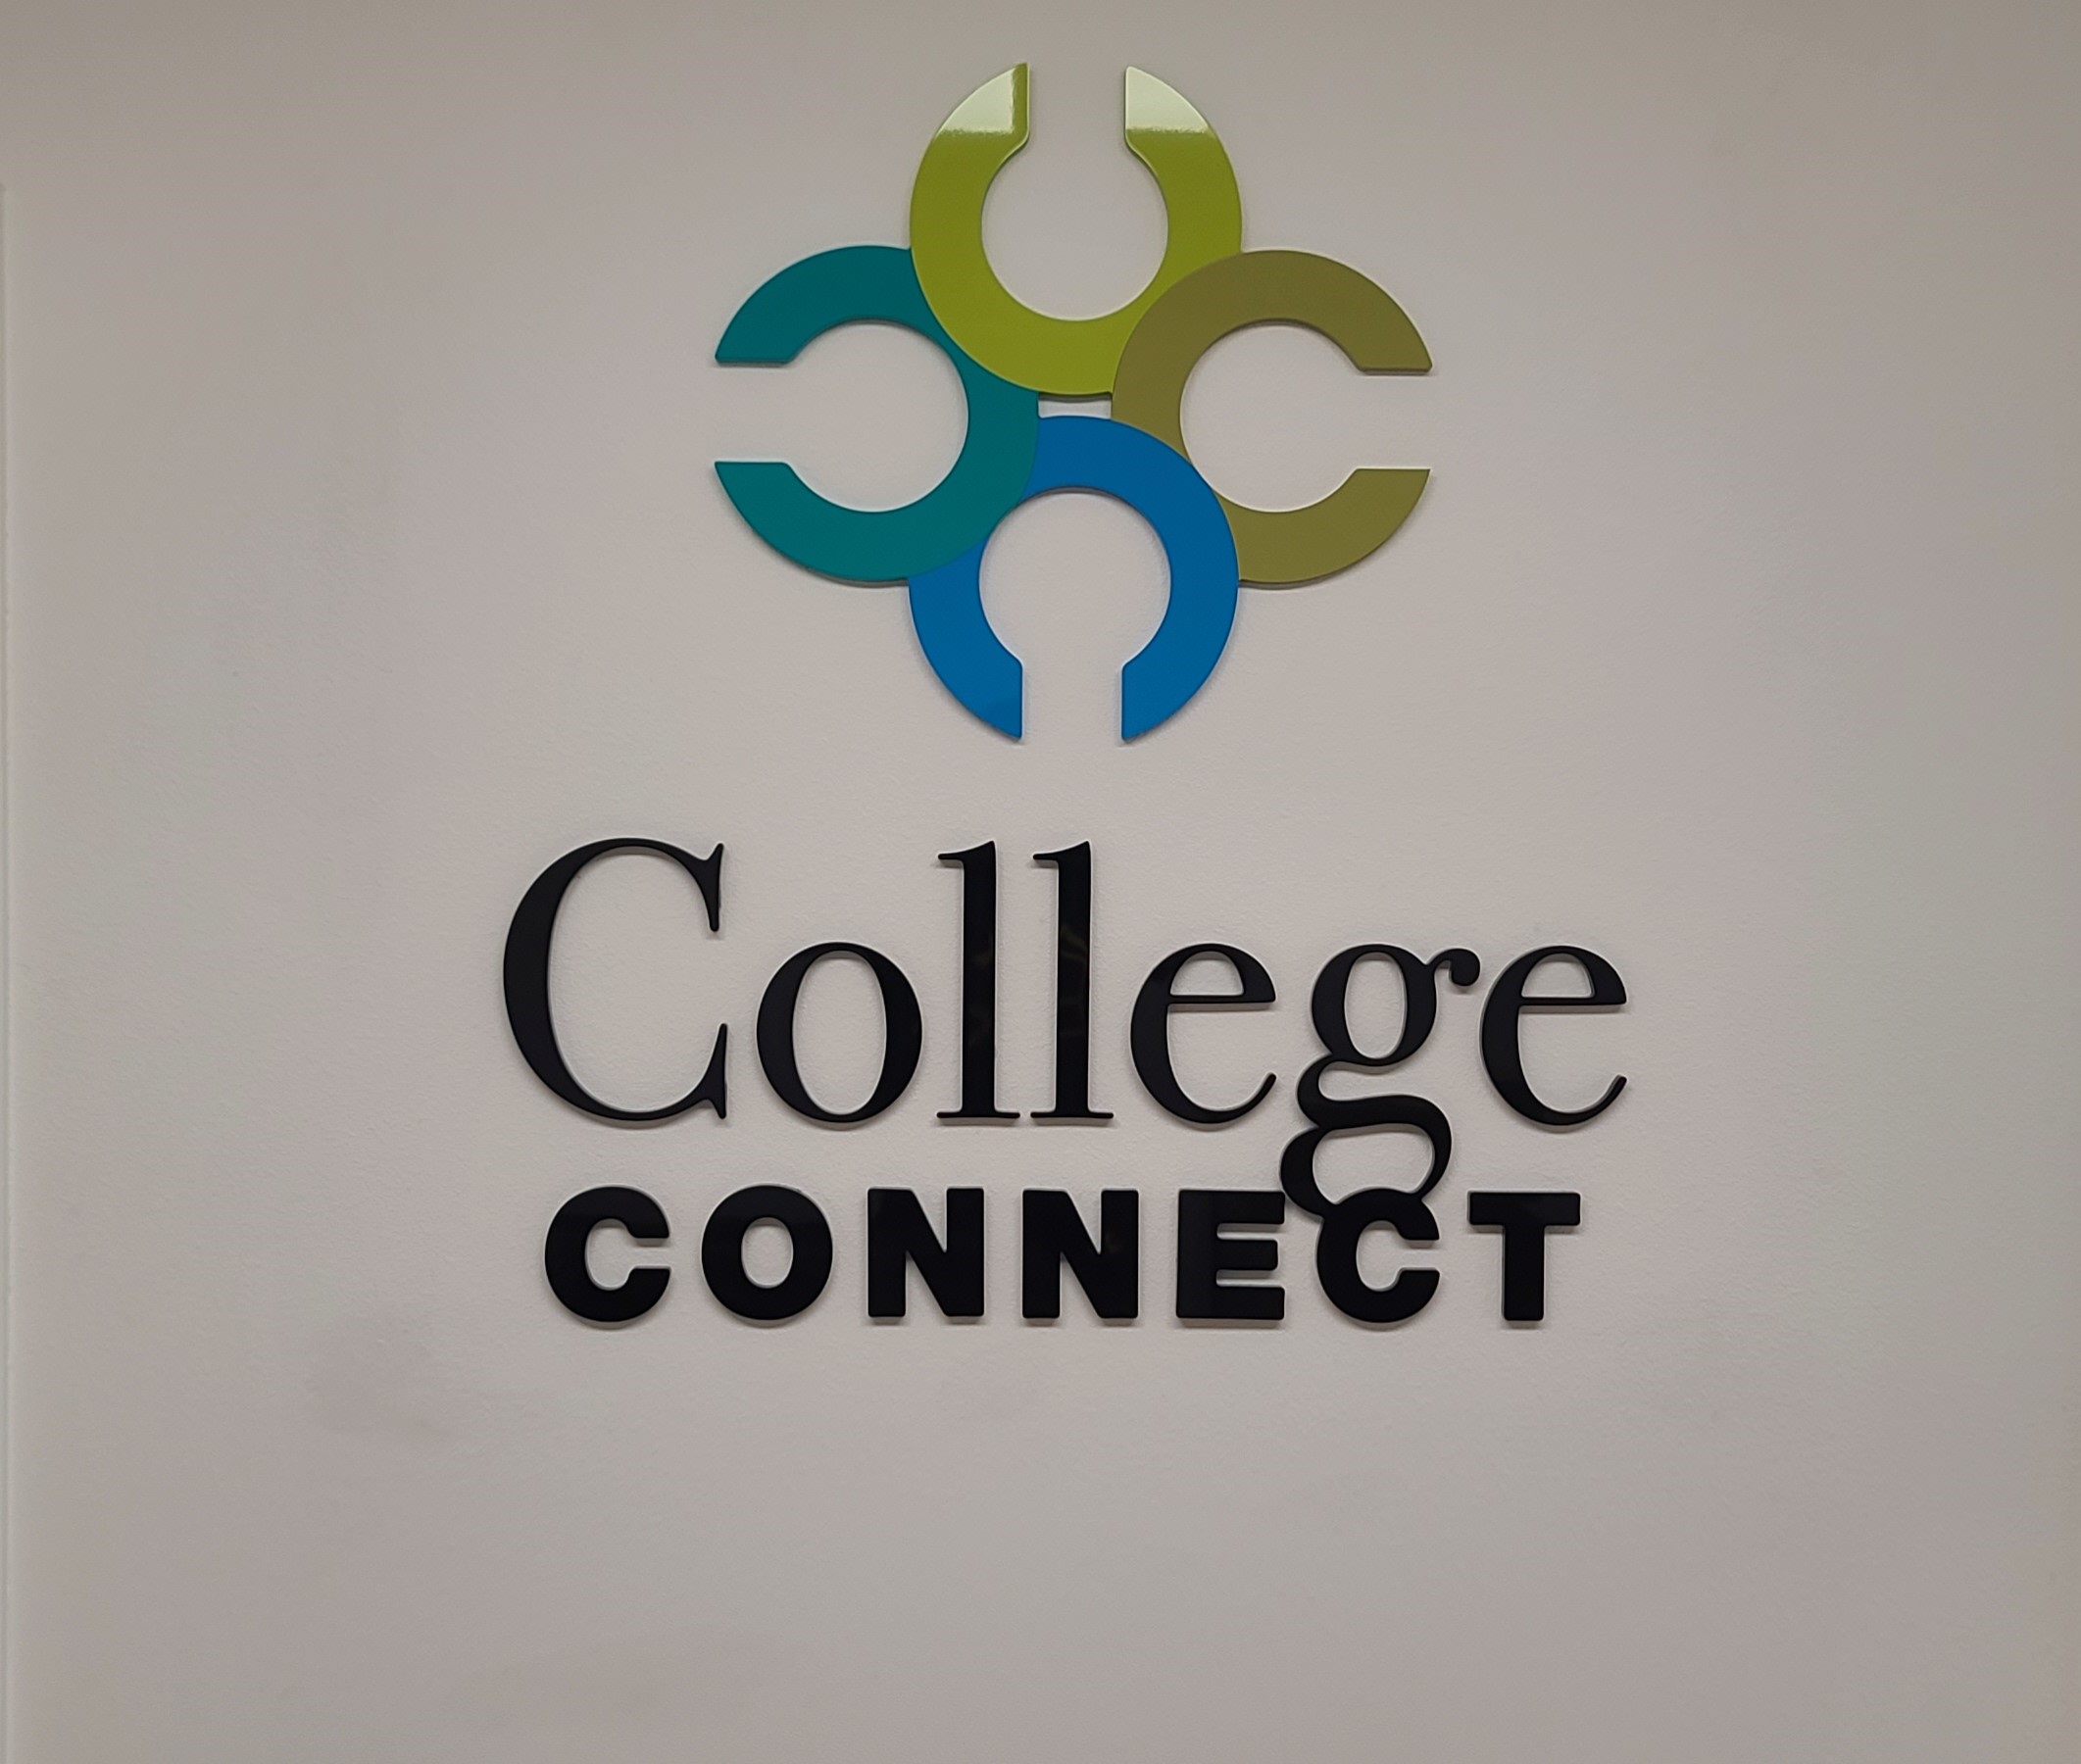 This acrylic lobby sign for College Connect's office in Thousand Oaks enhances the space and conveys the professionalism of the organization.